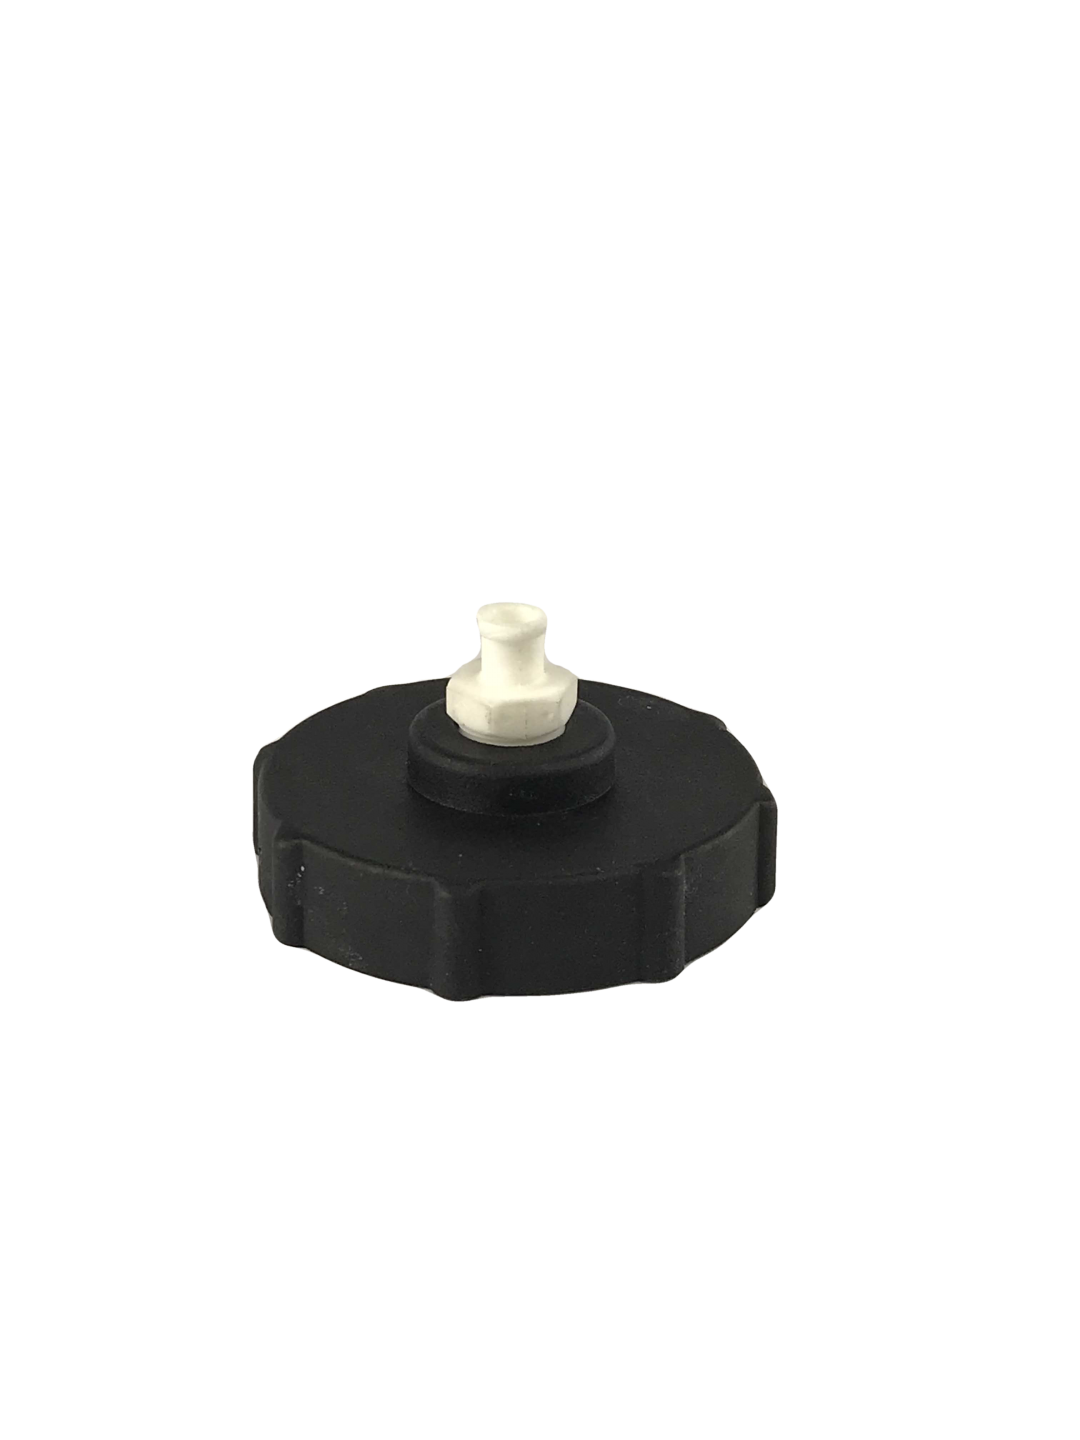 Black plastic BC-01 master cylinder cap with a white top. It is an individual cap adapter designed for Chrysler, Dodge, Jeep, and Plymouth master cylinder reservoirs. These are low-pressure adapters designed for 15-17 psi.